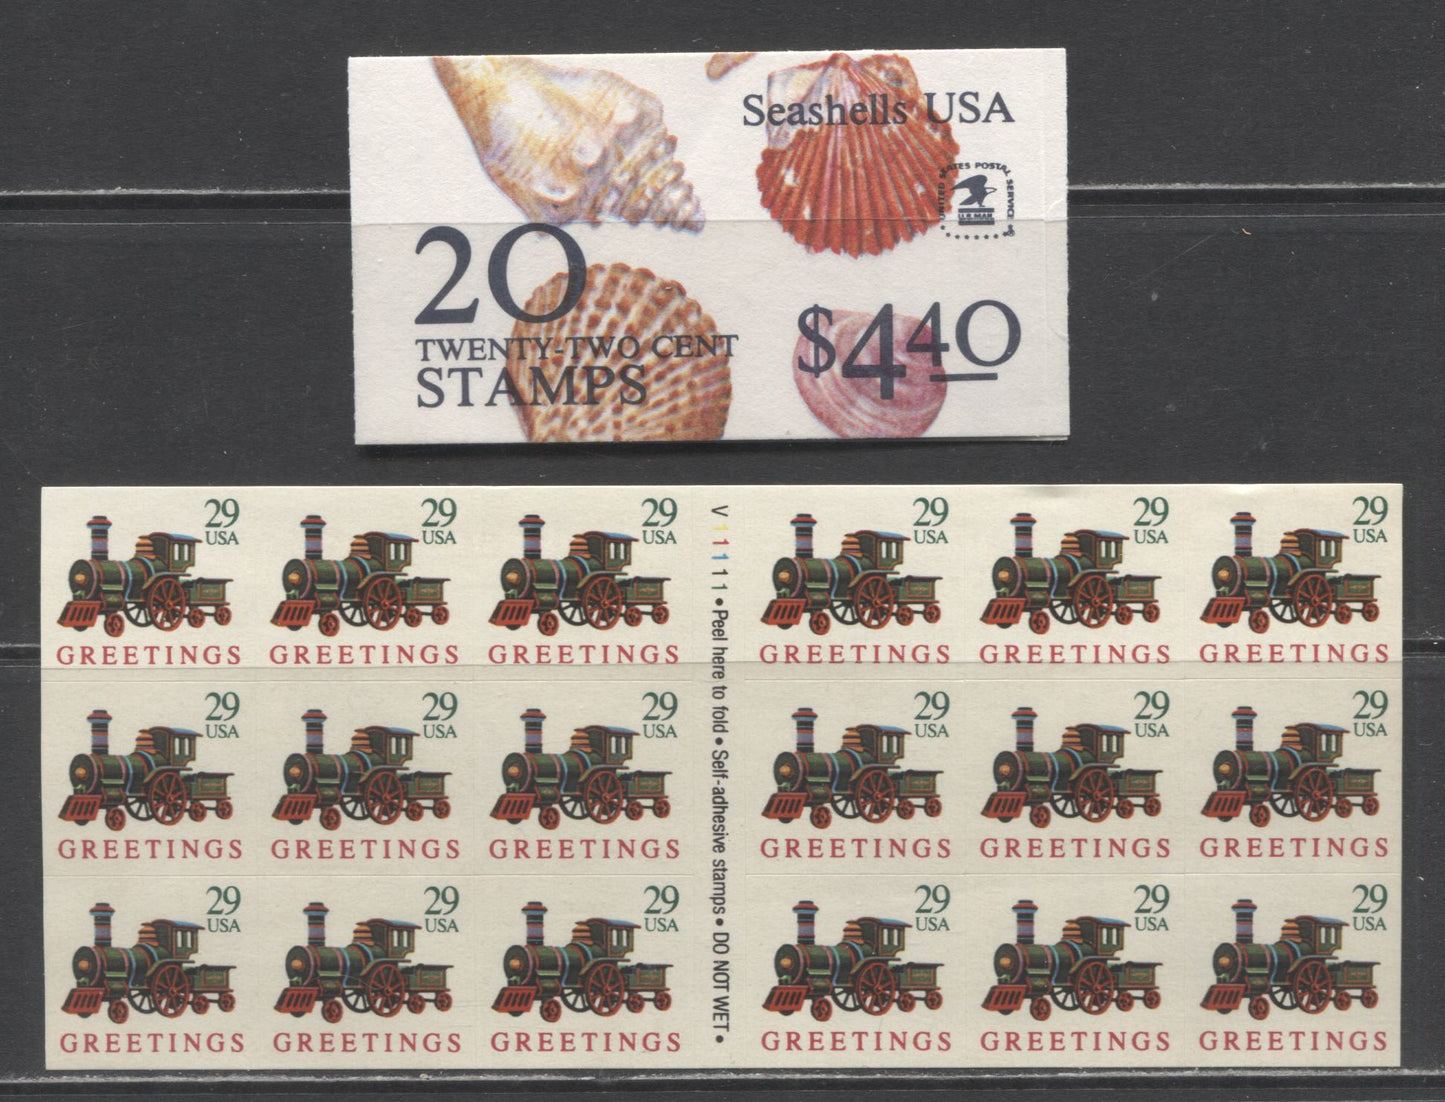 Lot 89 United States SC#2121a/2719a 1985-1992 Seashells - Greetings Issues, 2 VFNH Block Of 18 & Booklet Of 20, Click on Listing to See ALL Pictures, 2017 Scott Cat. $19